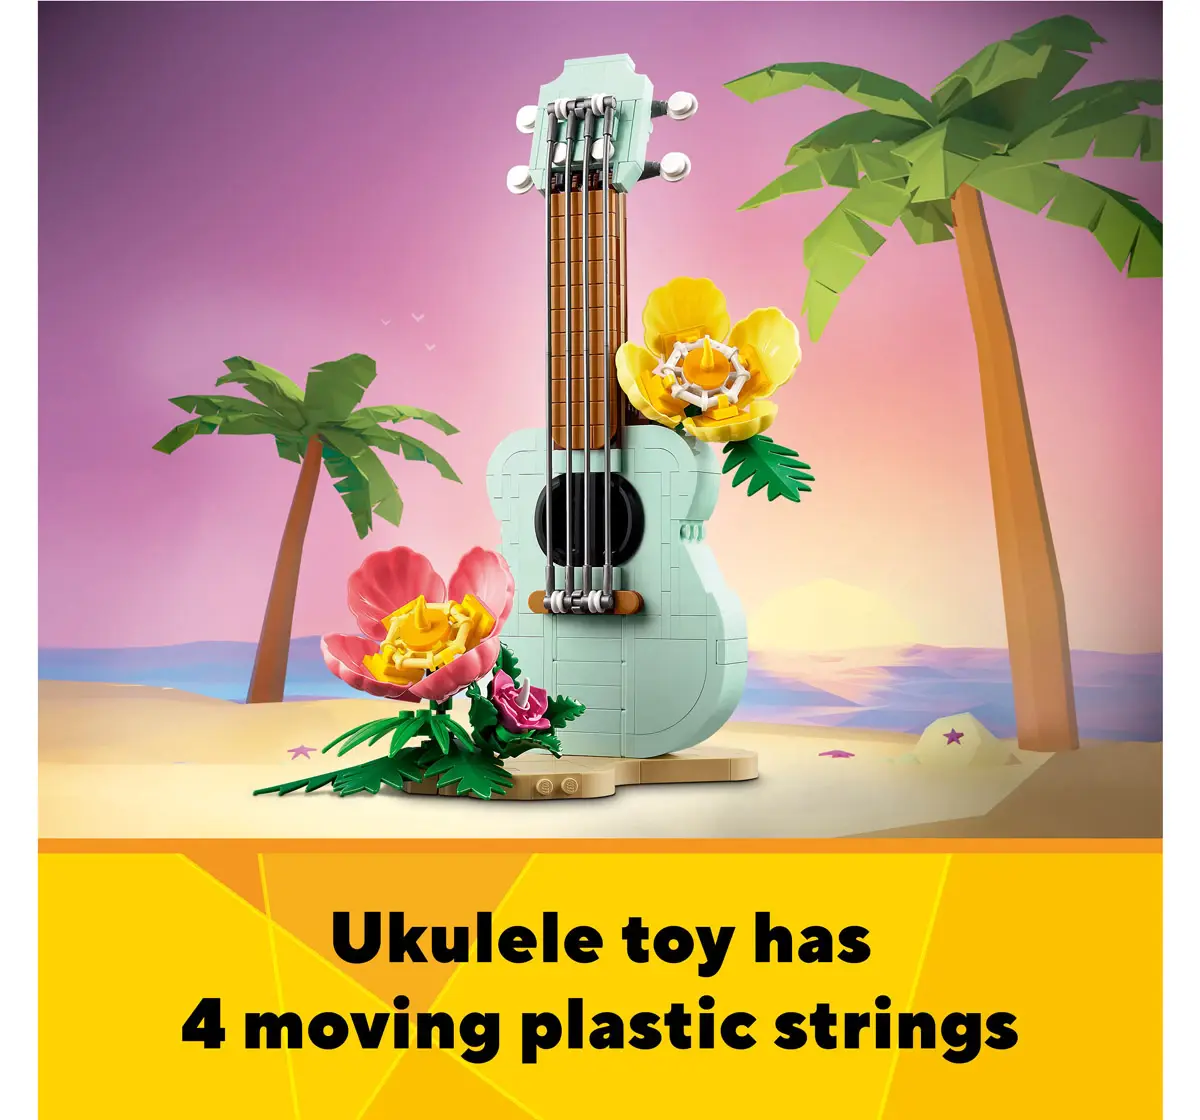 Lego Creator Tropical Ukulele 3 In 1 Toy Set 31156 Multicolour For Kids Ages 8Y+ (387 Pieces)